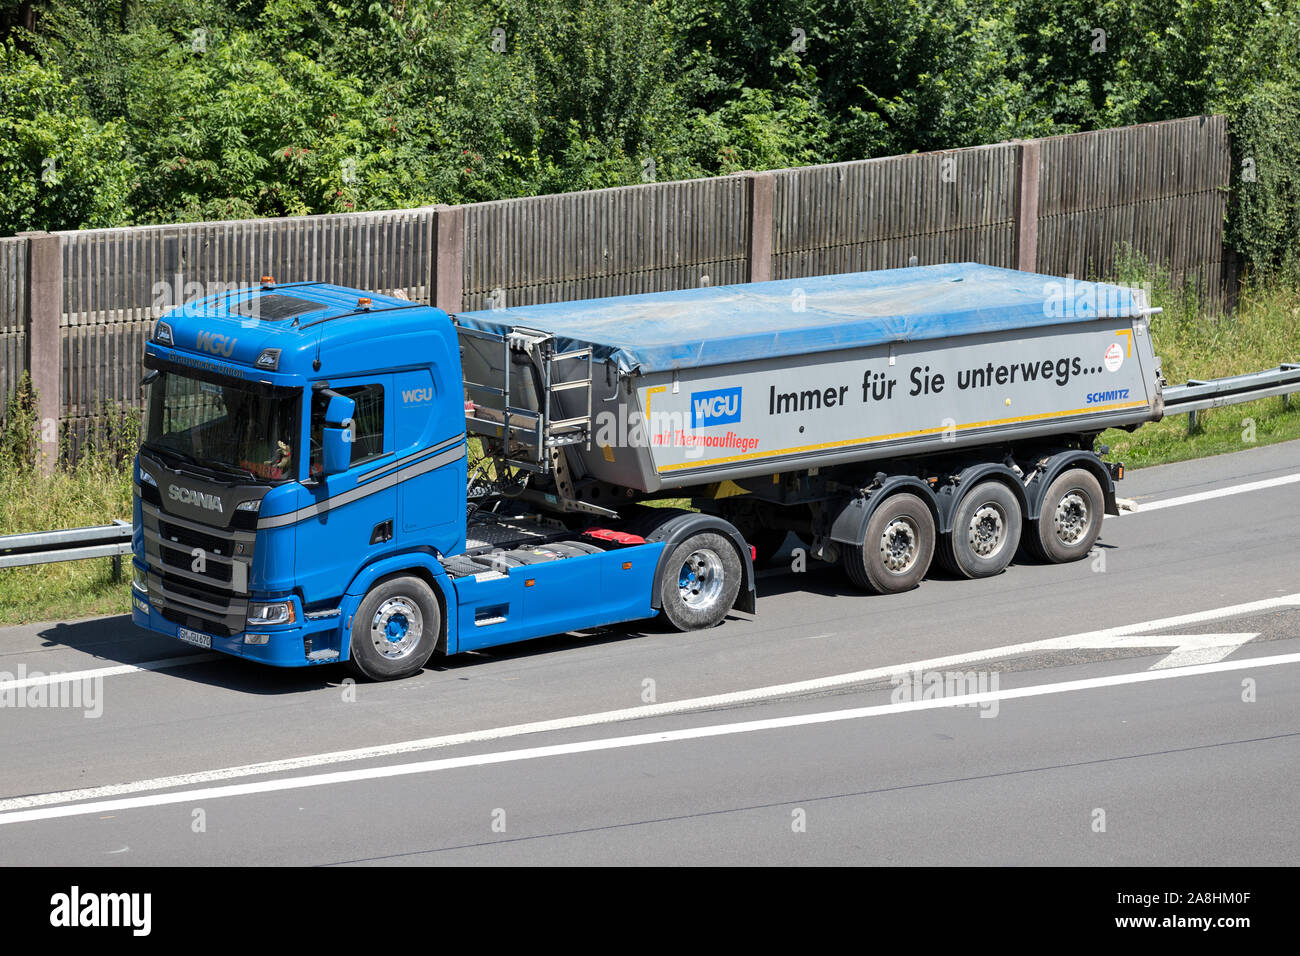 WGU Scania truck with tipper trailer on motorway. Stock Photo